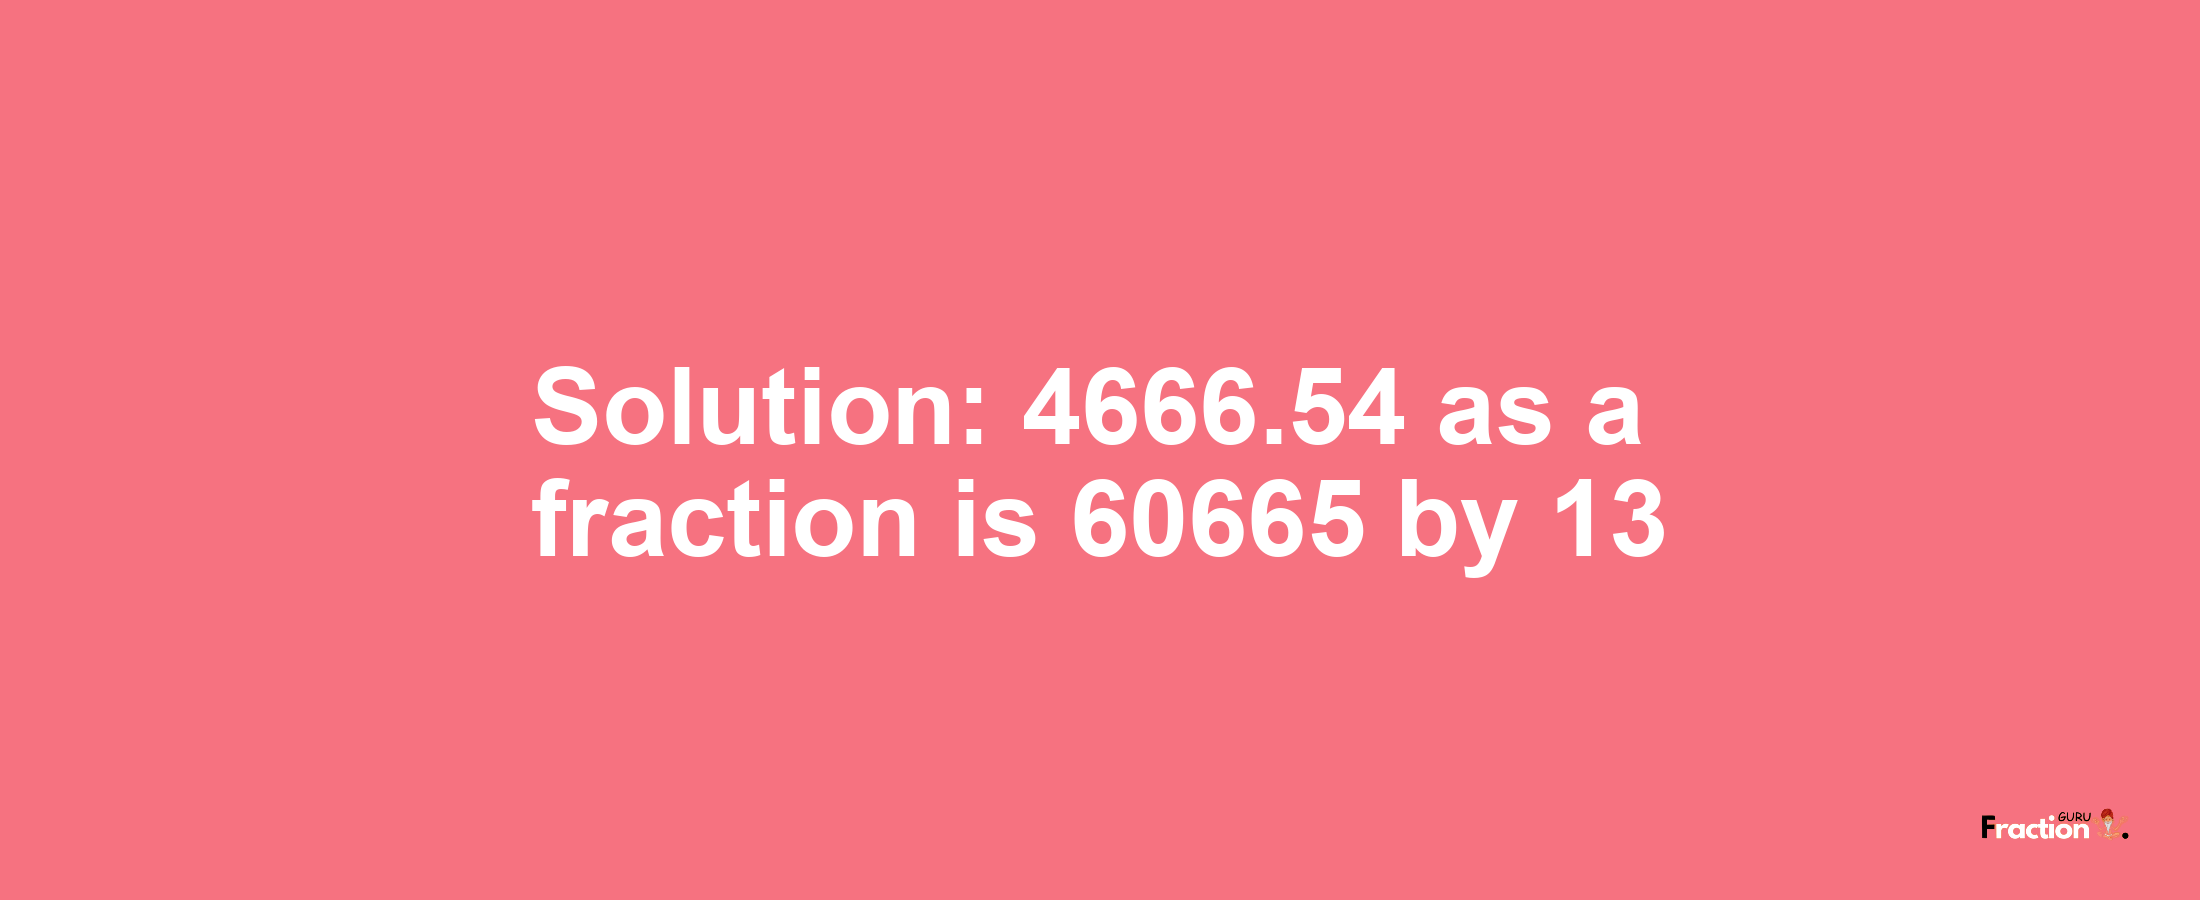 Solution:4666.54 as a fraction is 60665/13